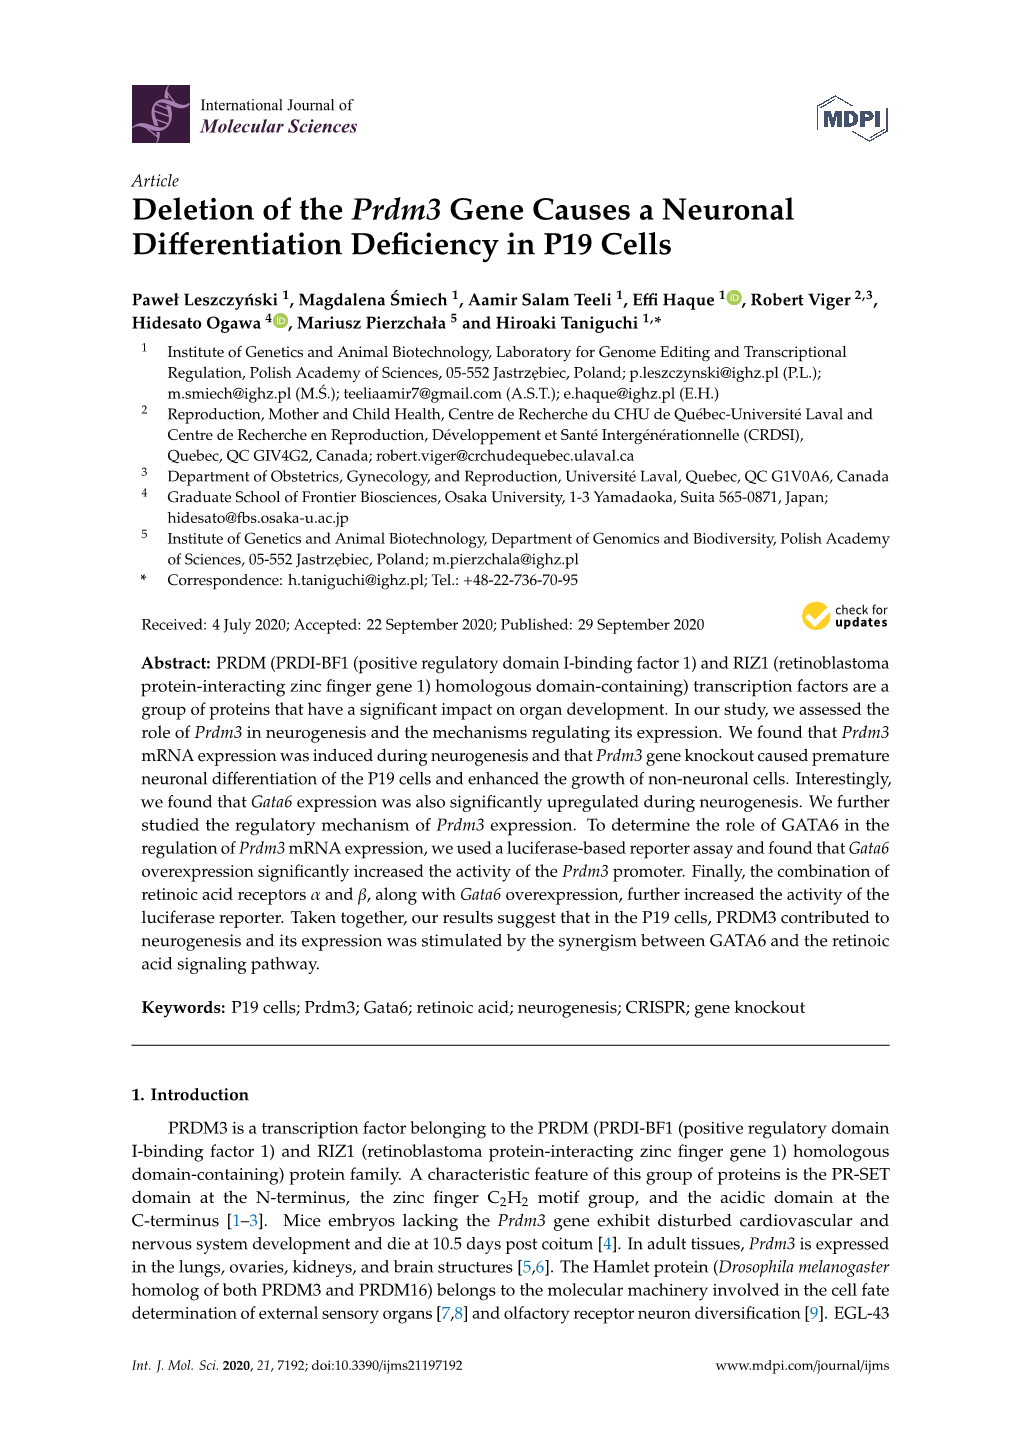 Deletion of the Prdm3 Gene Causes a Neuronal Differentiation Deficiency